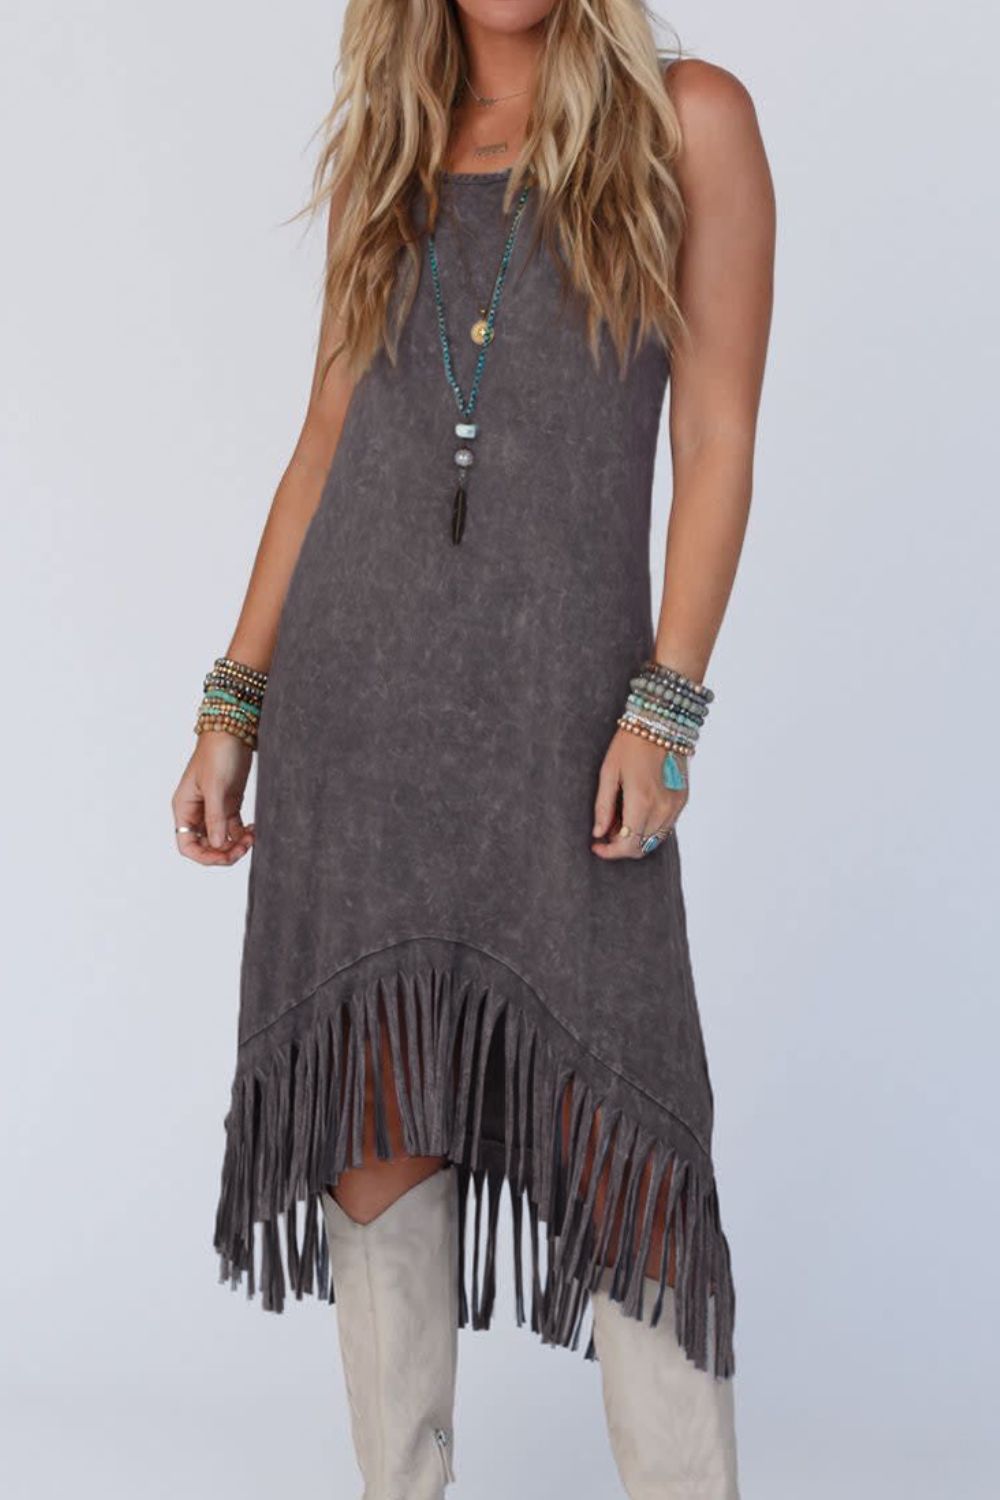 Boho-chic sleeveless midi dress with playful tassels, perfect for versatile day-to-night style. Comfort and elegance in one.